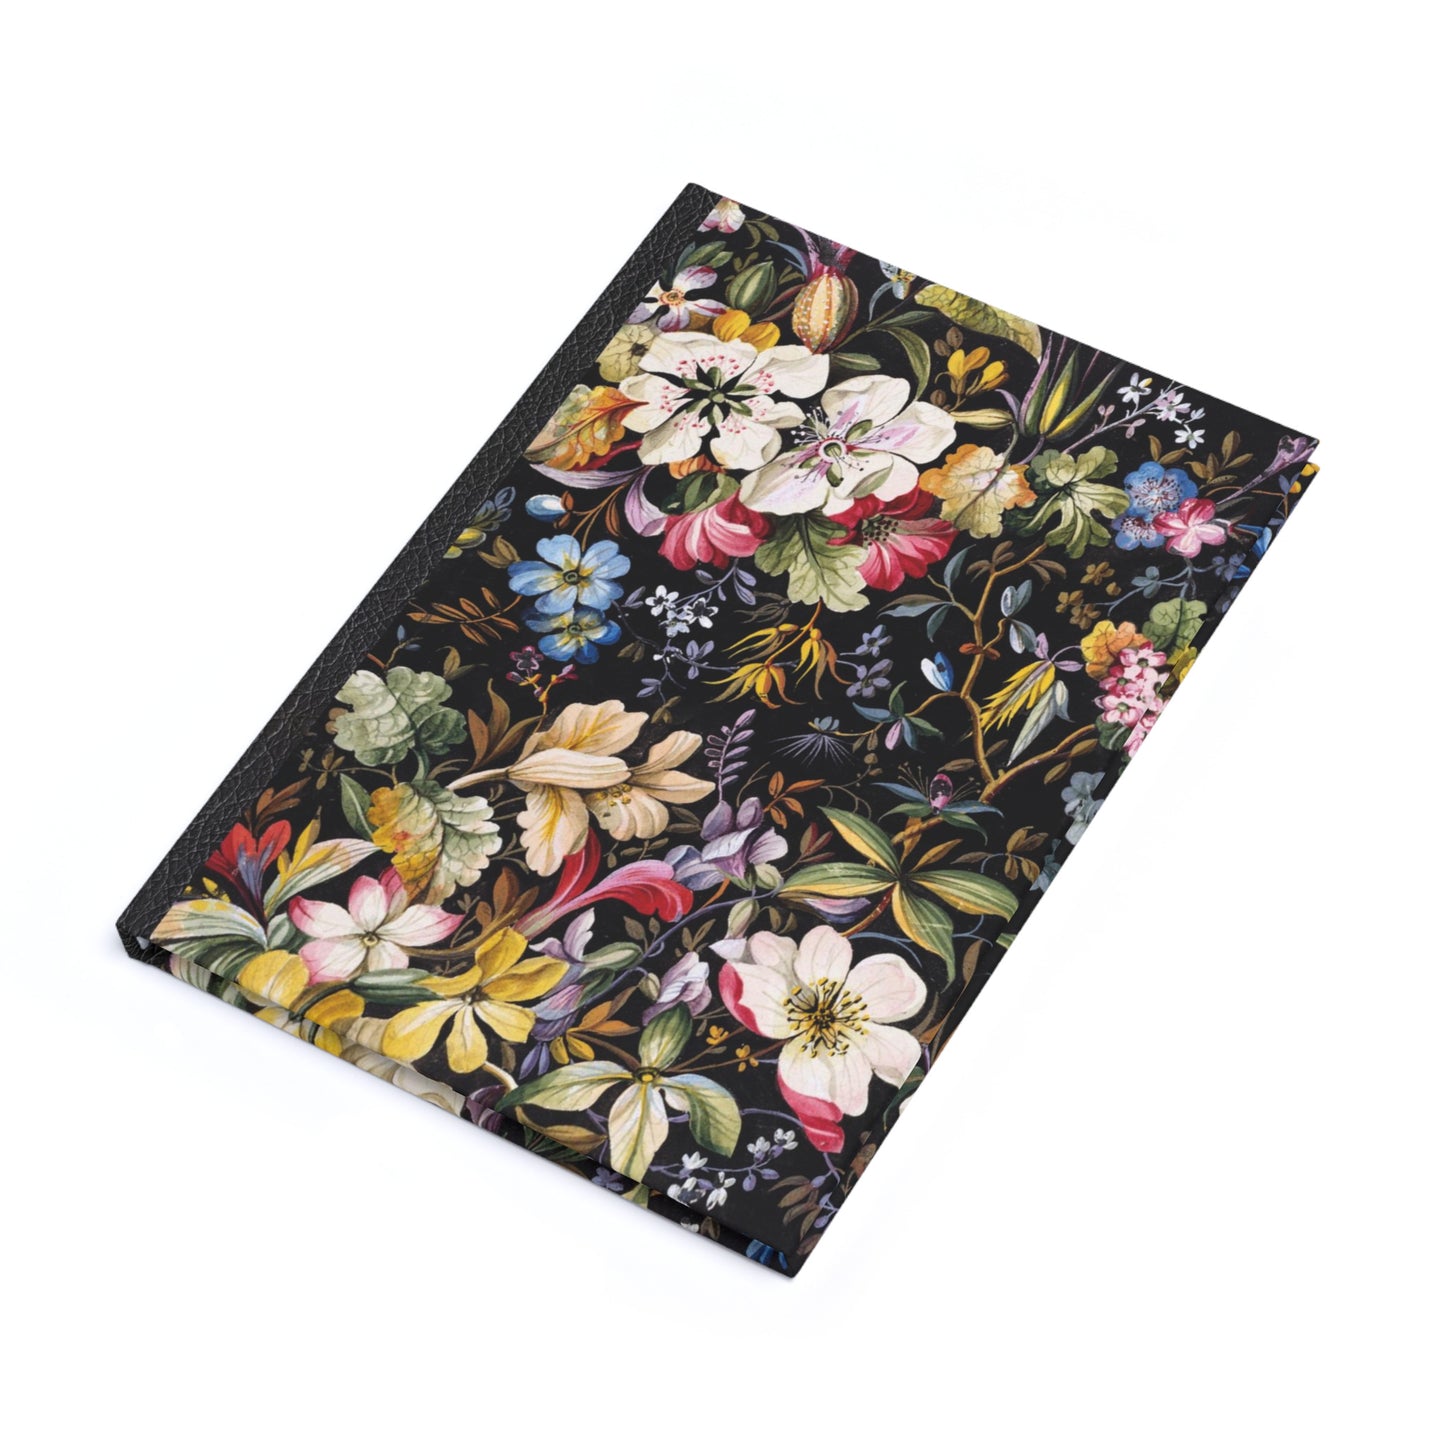 beautiful hardcover journal with a dark vintage vibe floral pattern cover